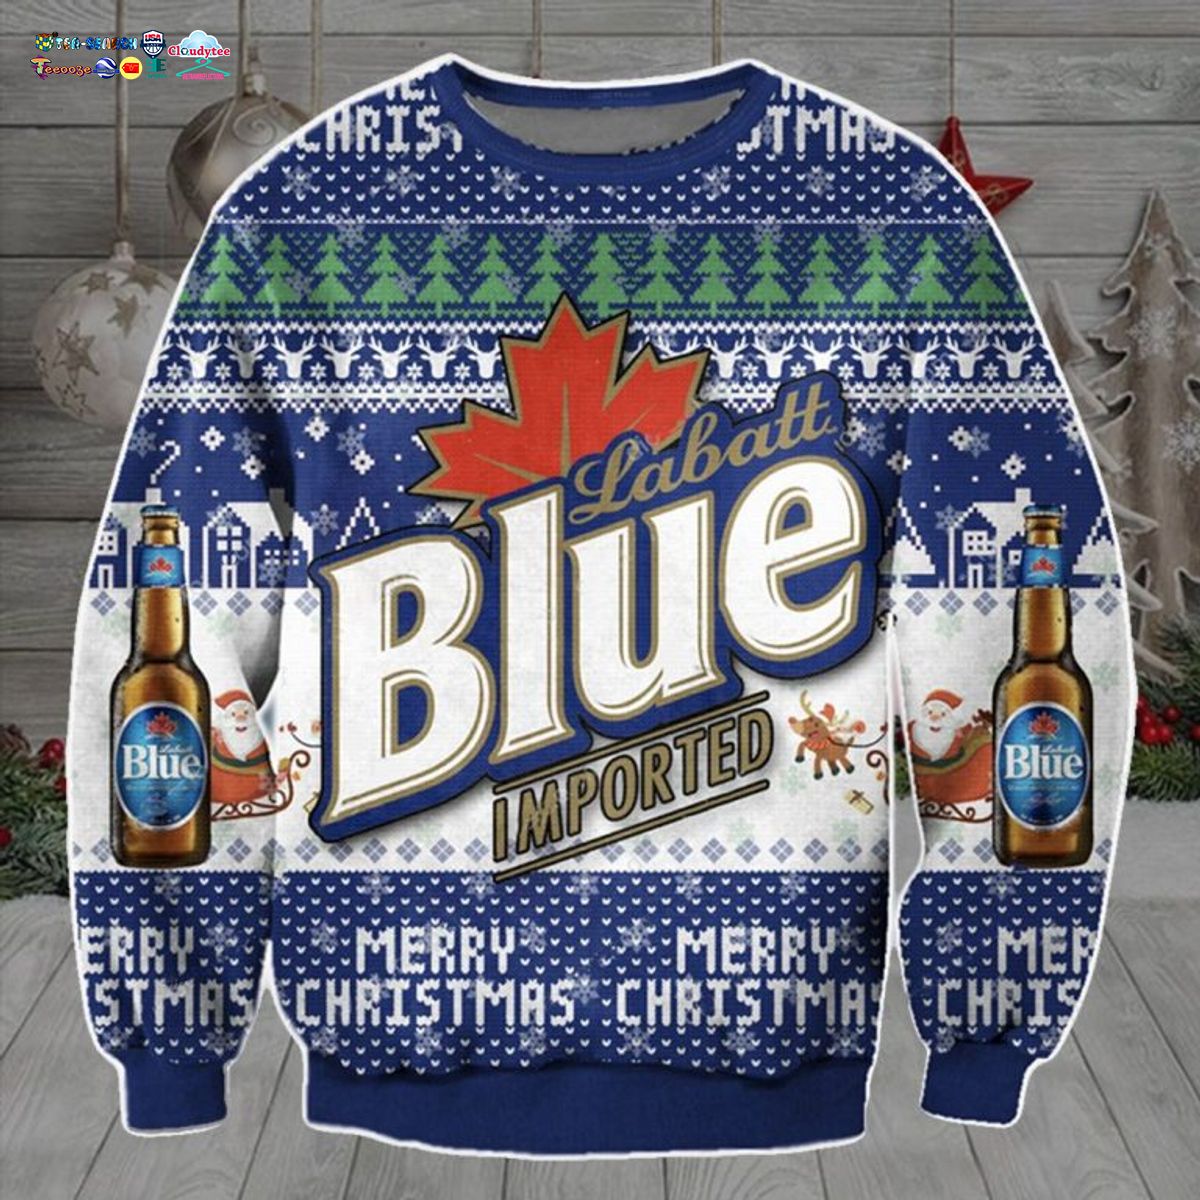 Labatt Blue Ugly Christmas Sweater - Handsome as usual